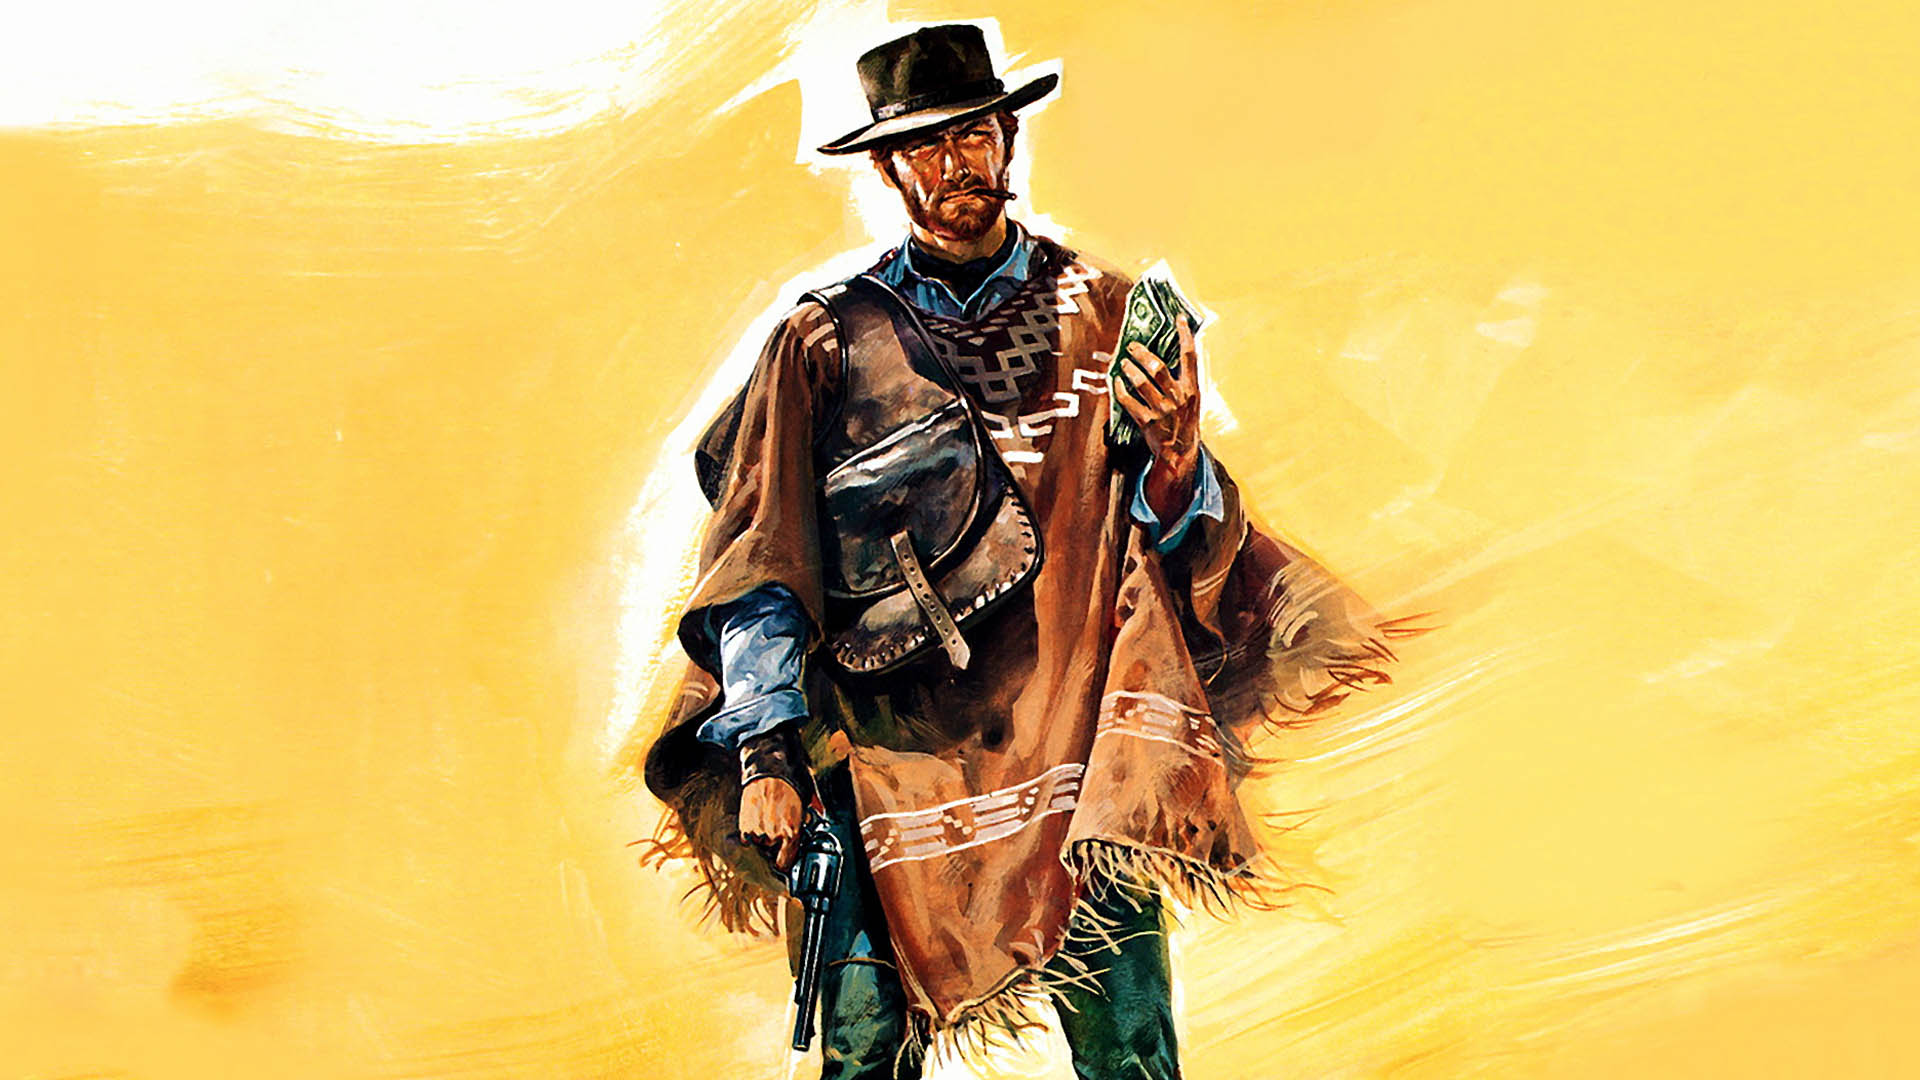 Watch A Fistful of Dollars Online | Stream Full Movies